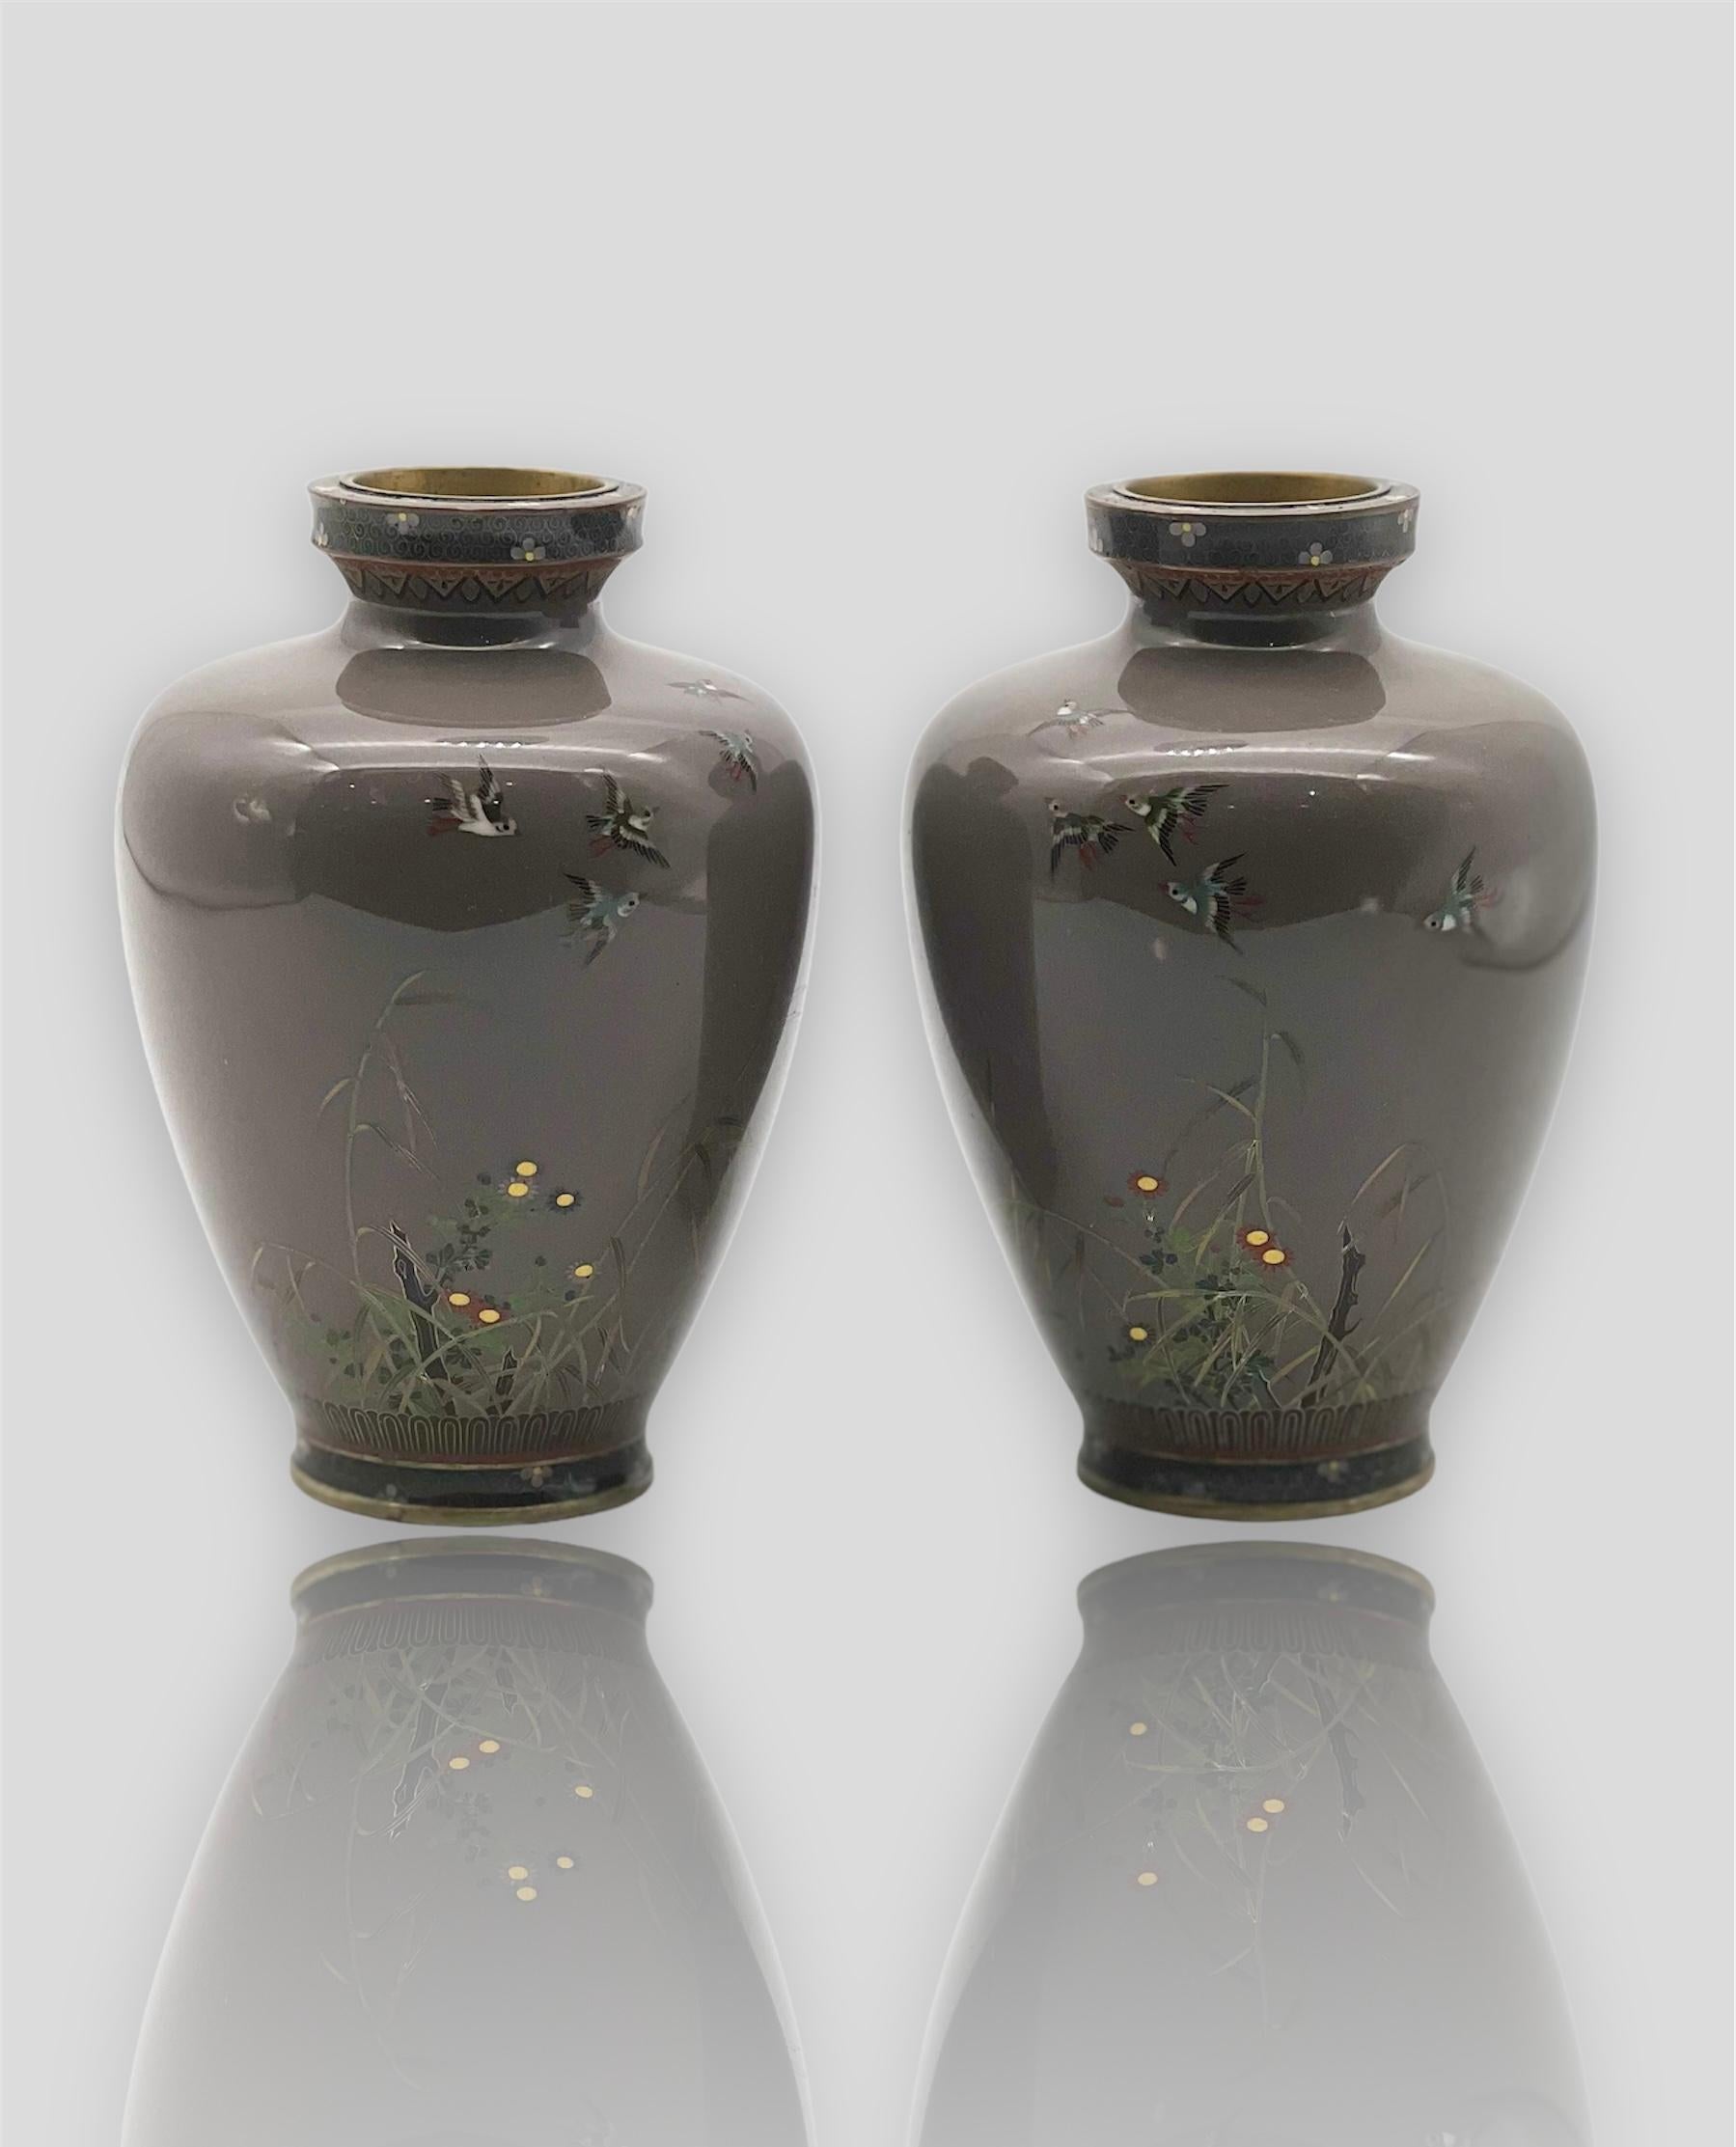 A Fine Pair of Japanese Cloisonne Enamel Vases Attributed to Hayashi Kodenji For Sale 1